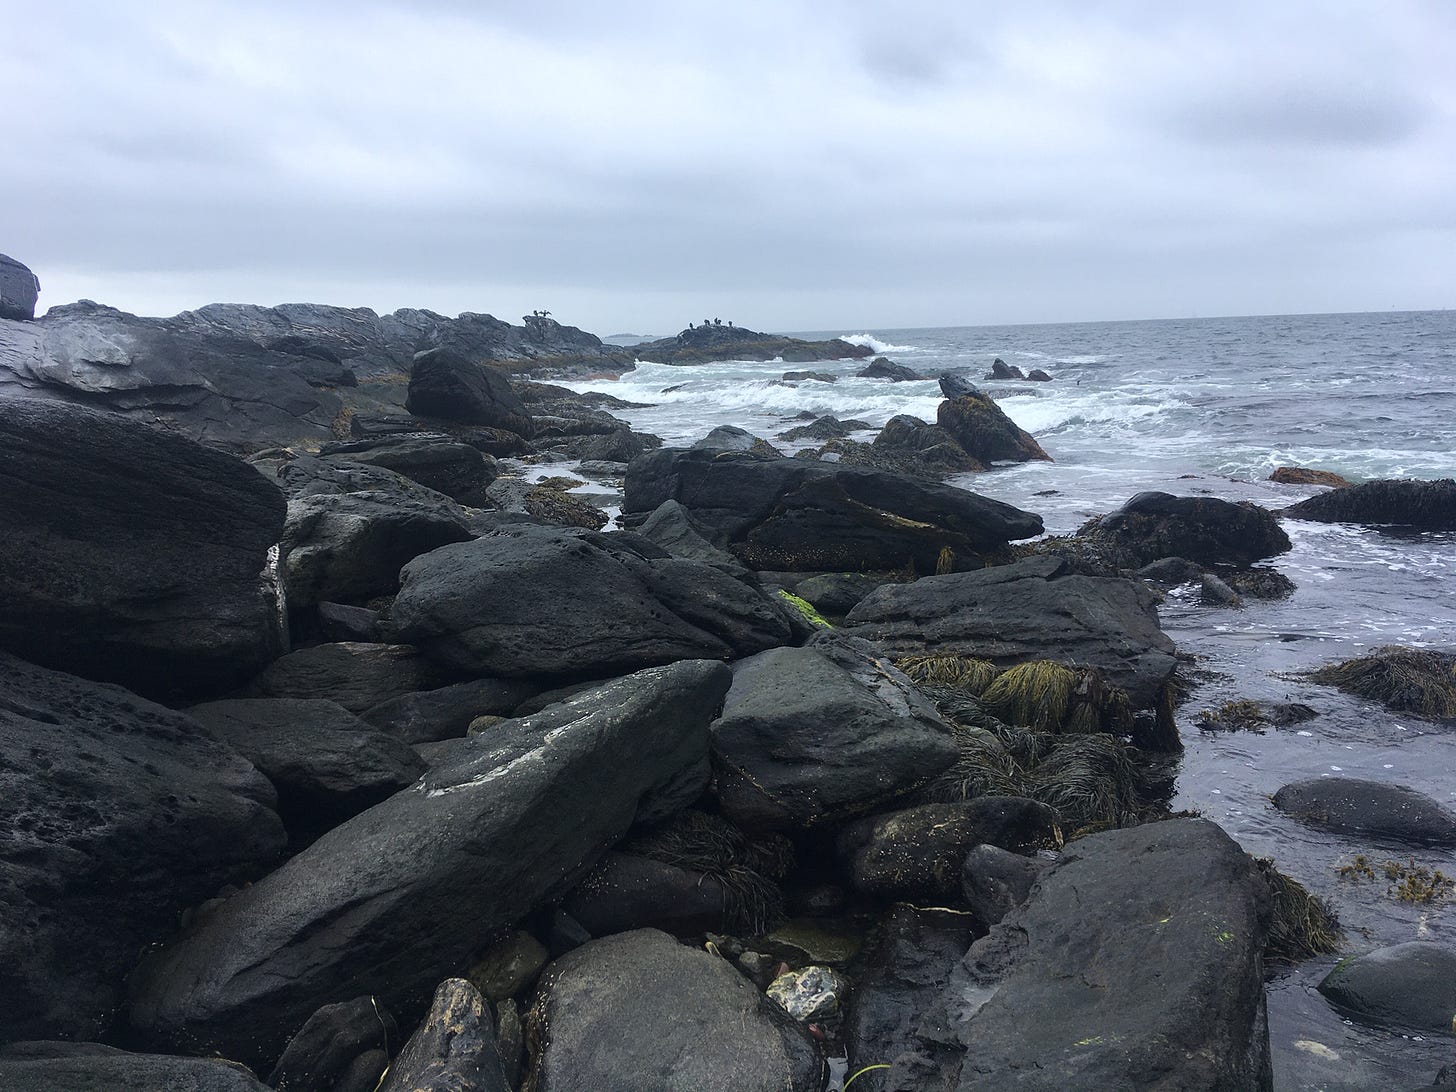 Dark gray boulders lapped by waves on an overcast day